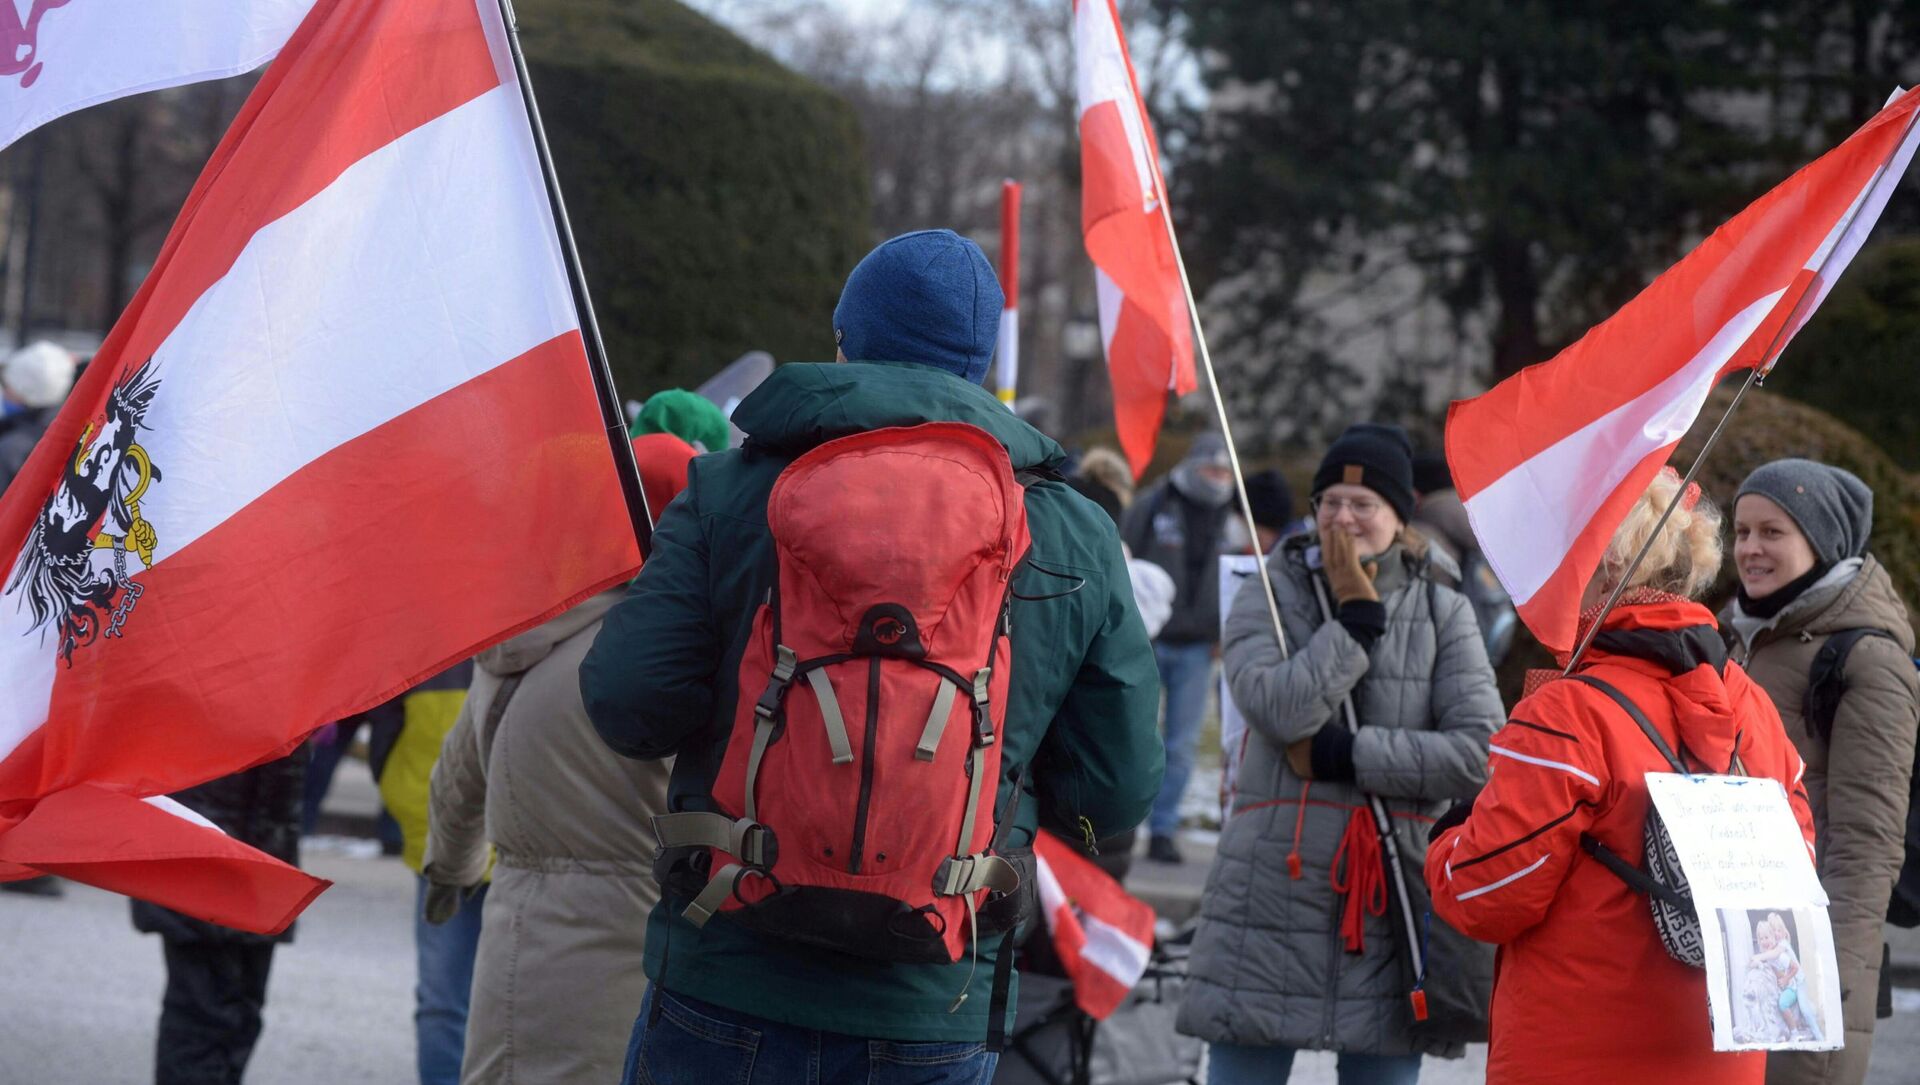 Demonstrators wave Austrian flags as they protest against the restrictions and measures taken by the Austrian government to fight the novel coronavirus, on 13 February 2021 in Vienna, amid the novel coronavirus / COVID-19 pandemic. - Sputnik Moldova-România, 1920, 06.03.2021